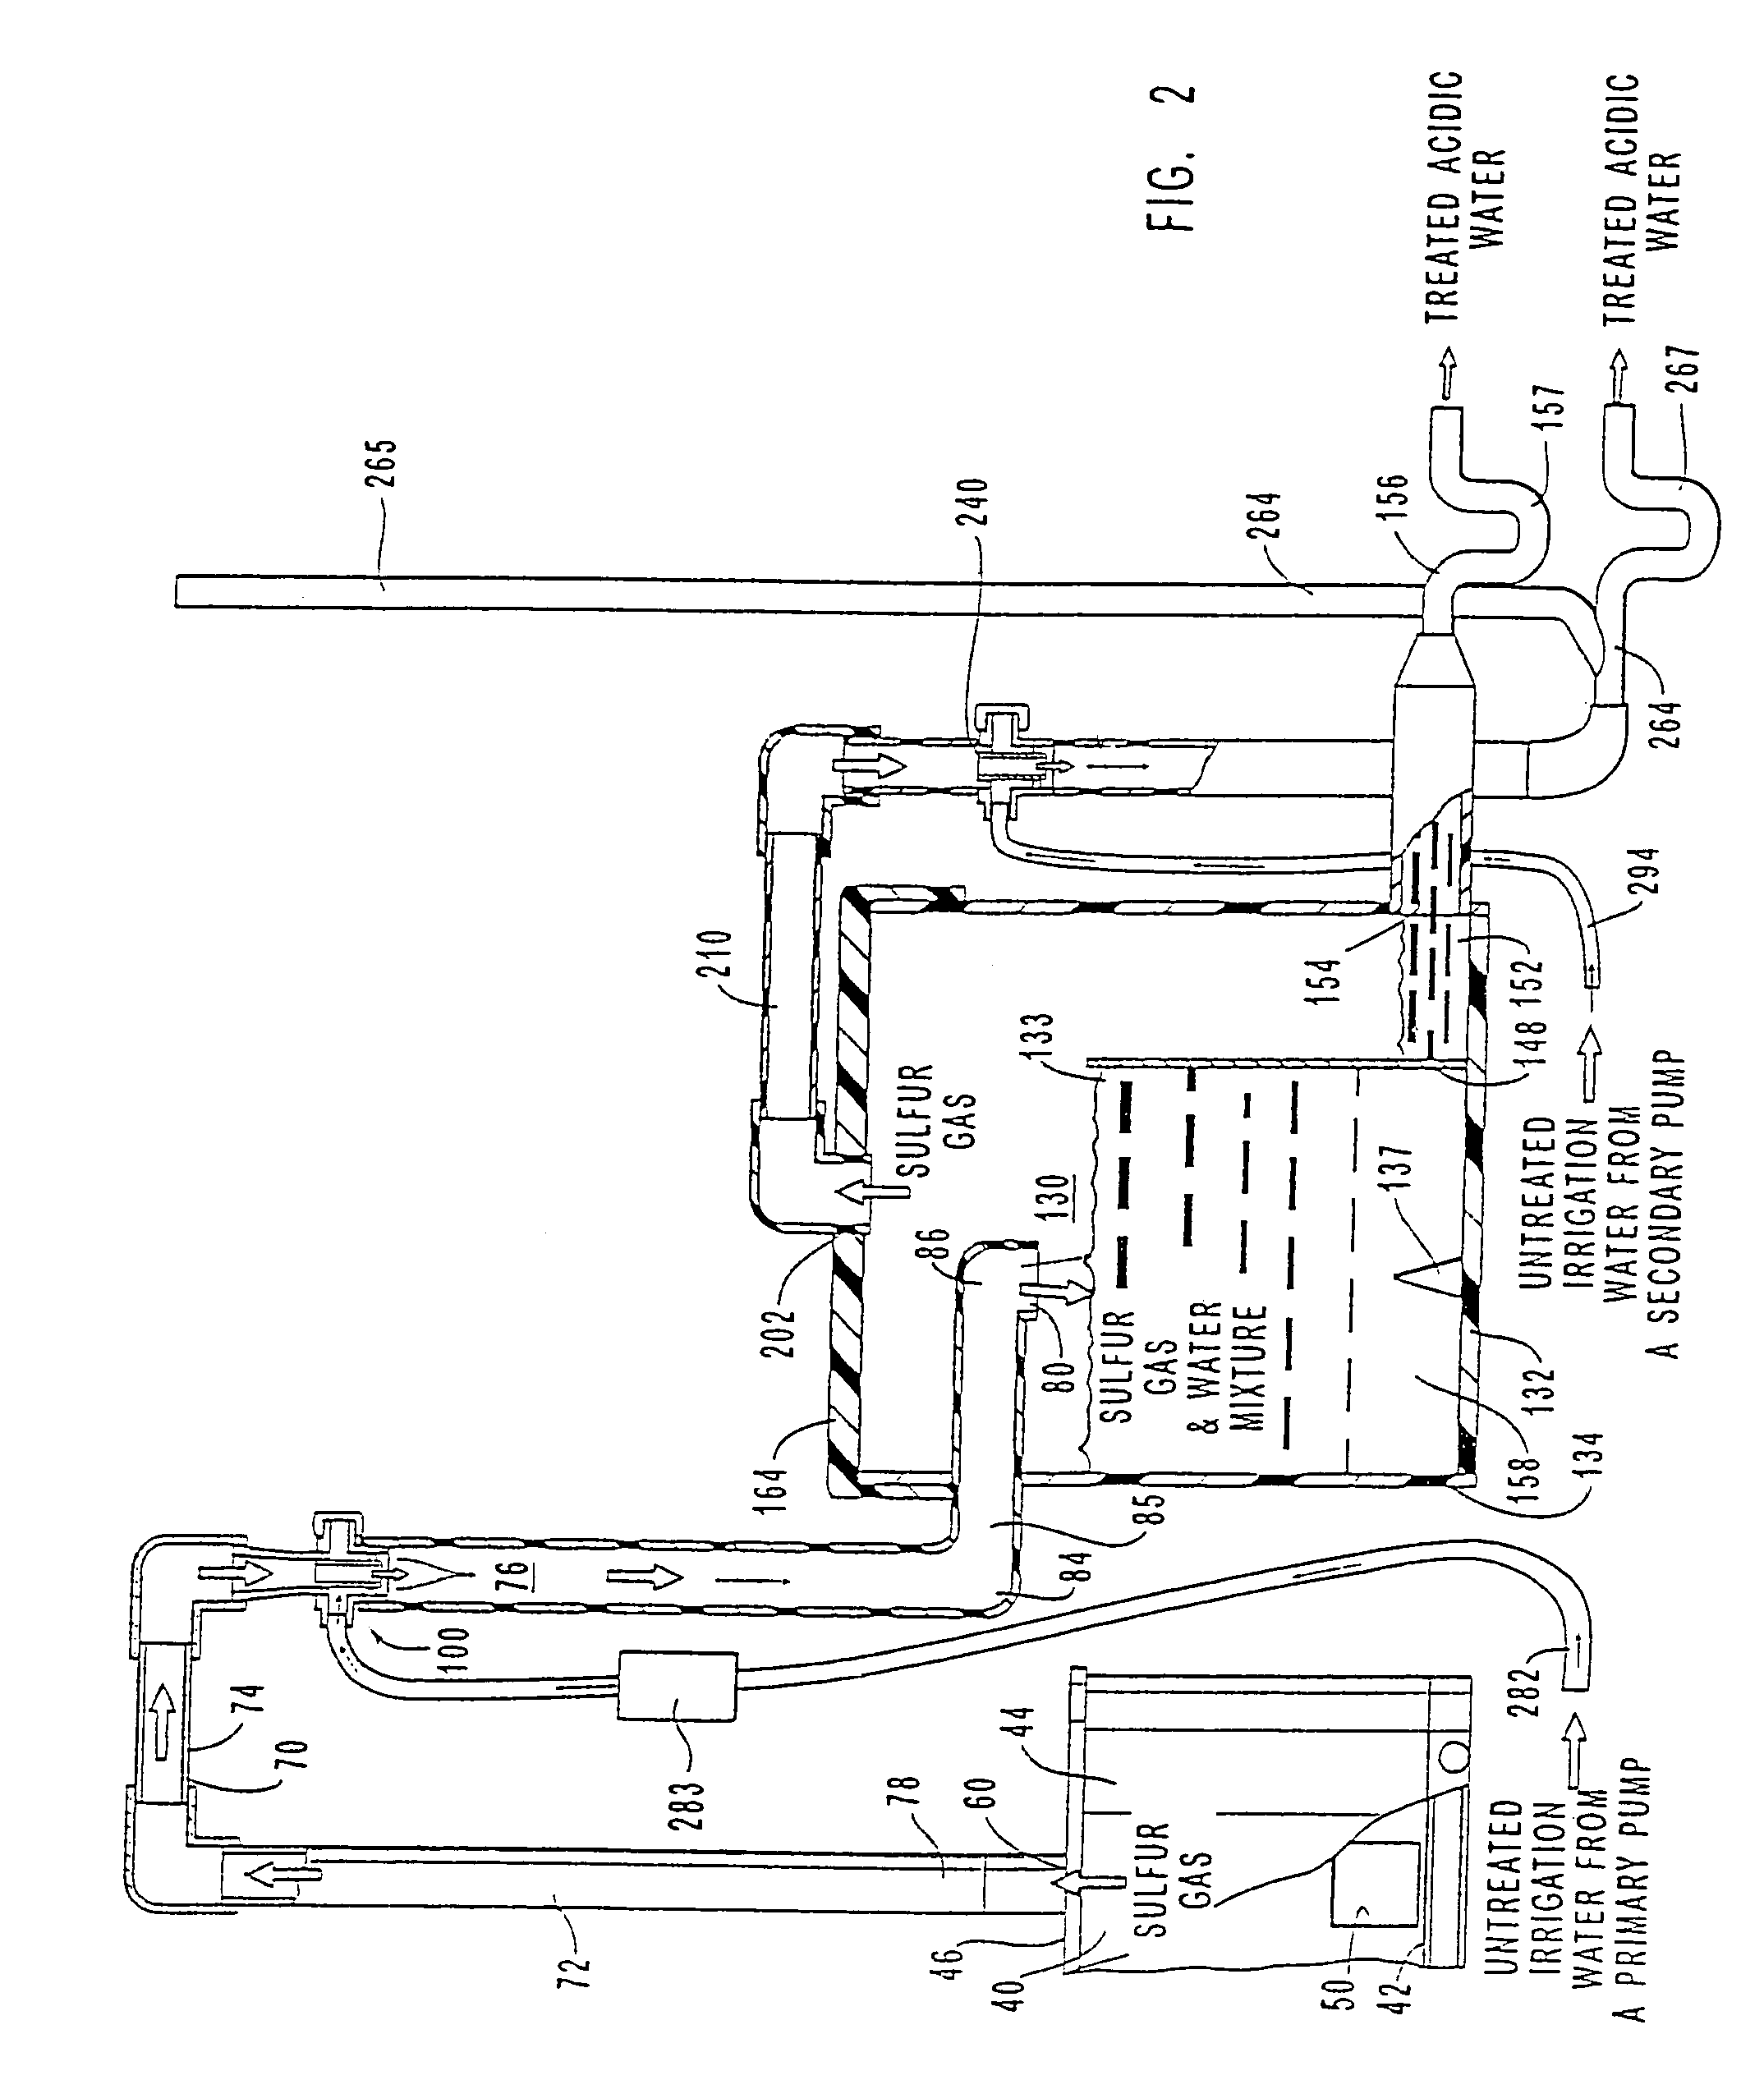 Sulphurous acid generator with air injector